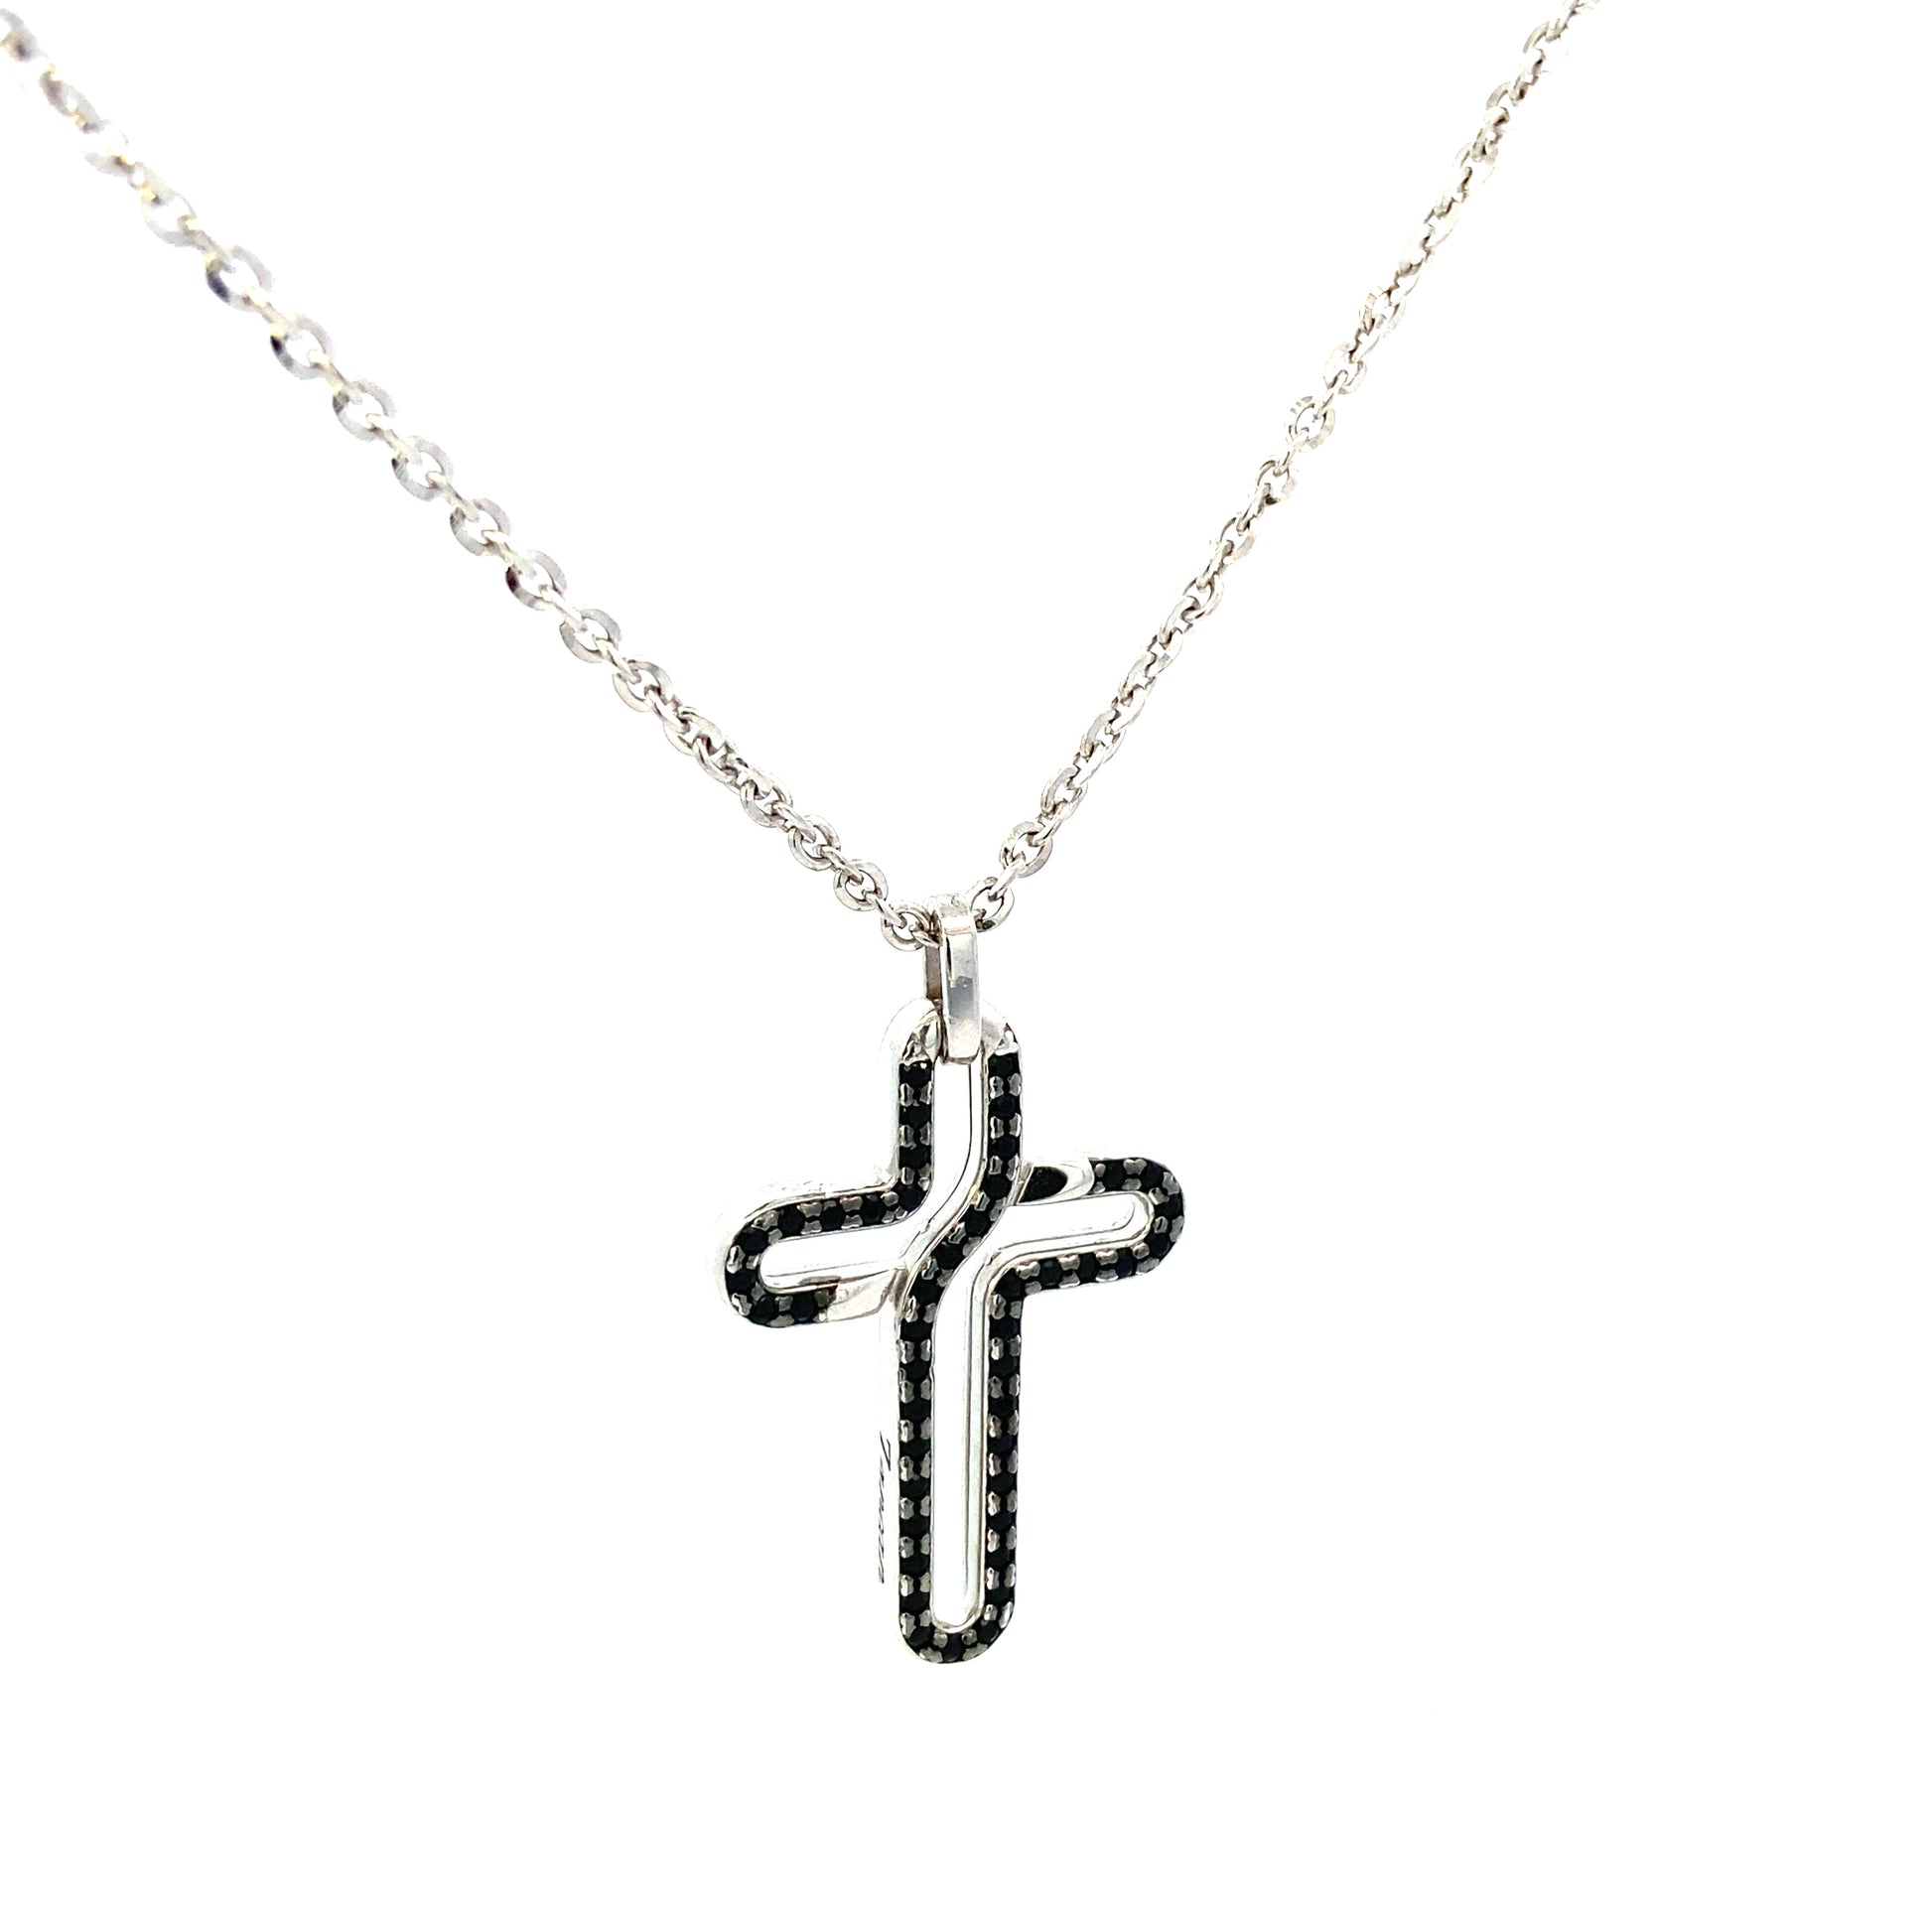 Necklace Silver with Cross and Onix | Zancan | Luby 